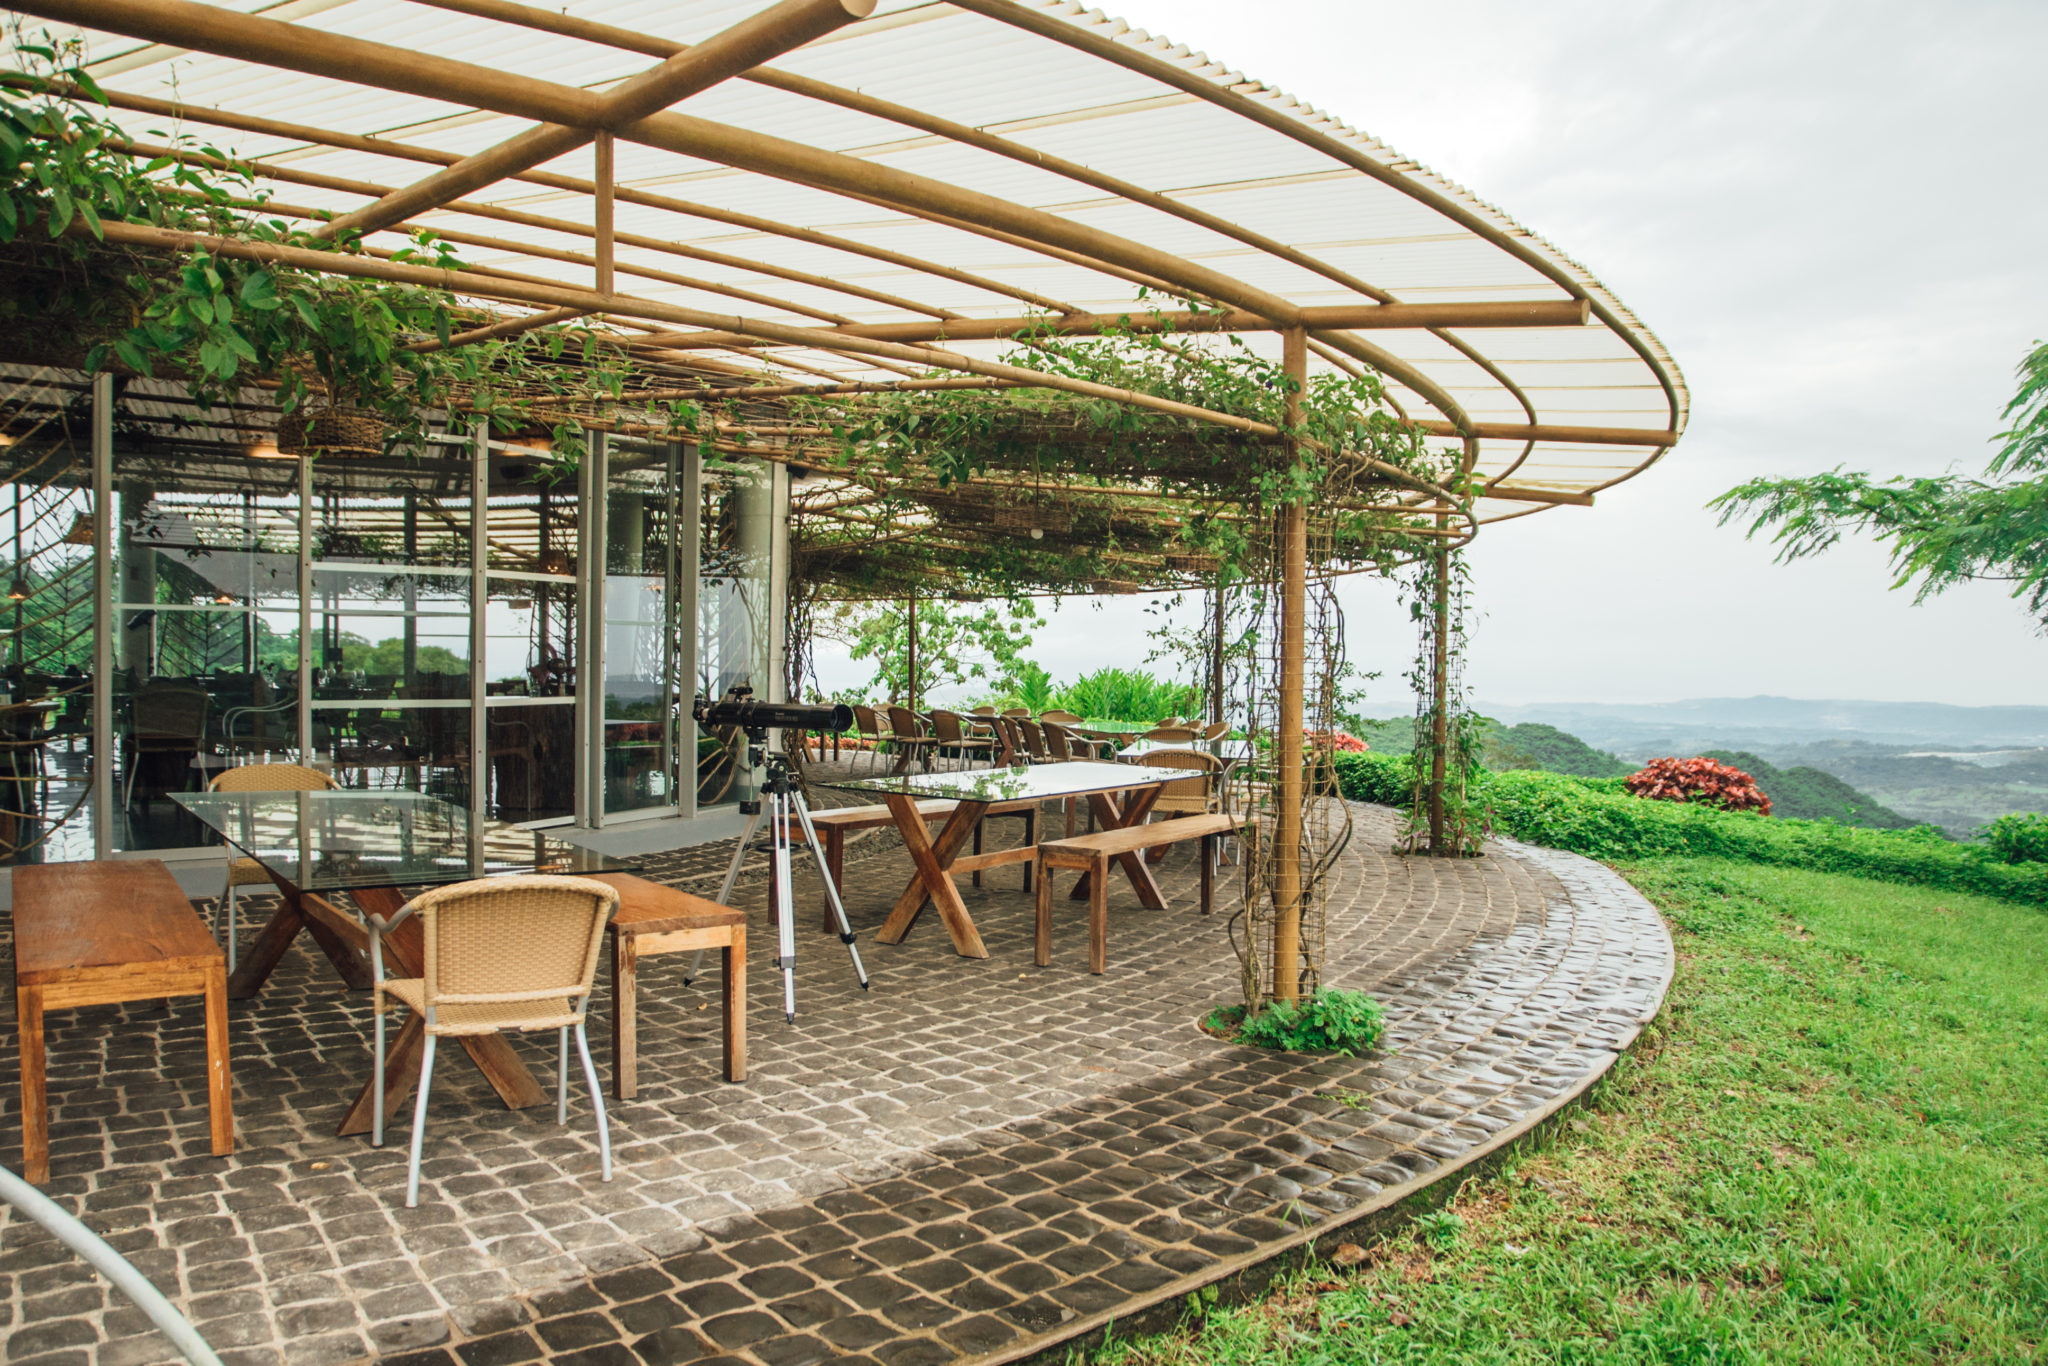 Tucked in the forests of Rizal, Masungi Georeserve complements its eco-friendly trails with seasonal restaurant Silayan that serves homegrown food